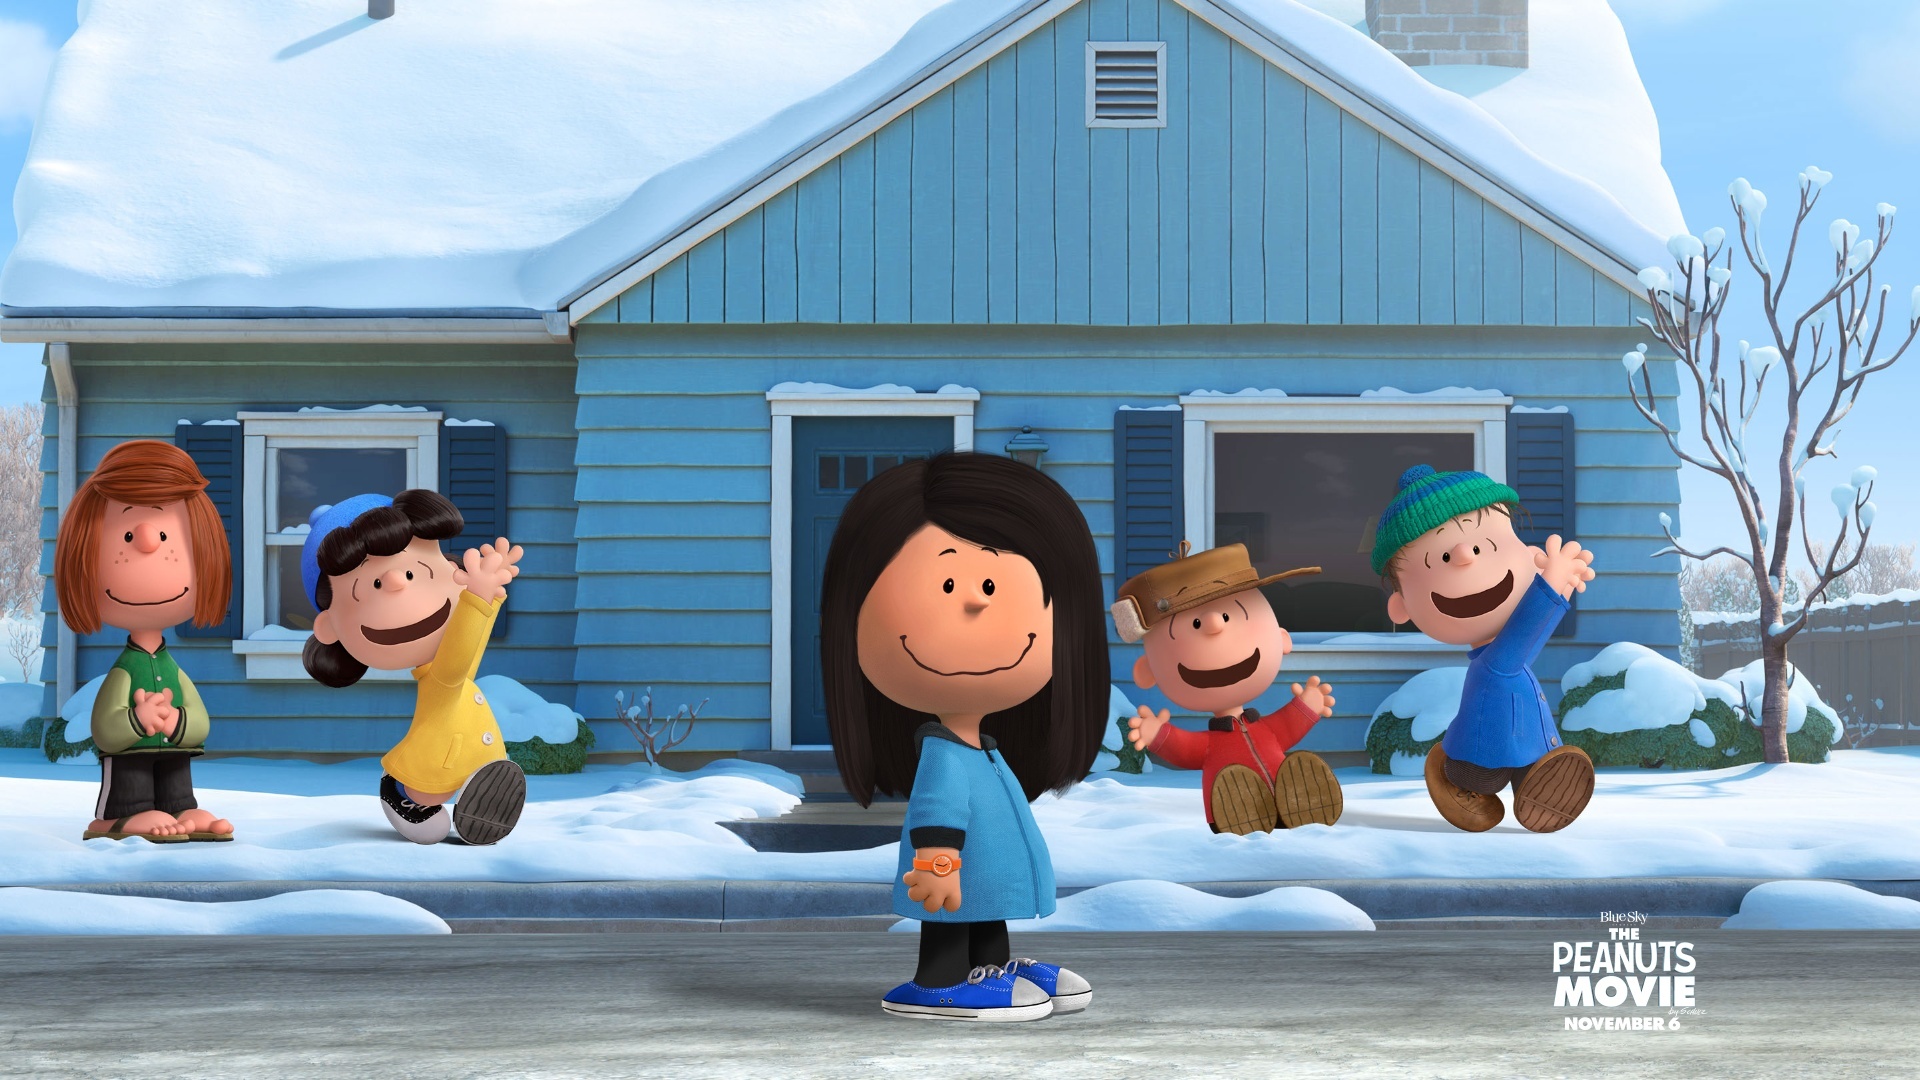 The Peanuts Movie, Animation frenzy, Memorable characters, Children's delight, 1920x1080 Full HD Desktop